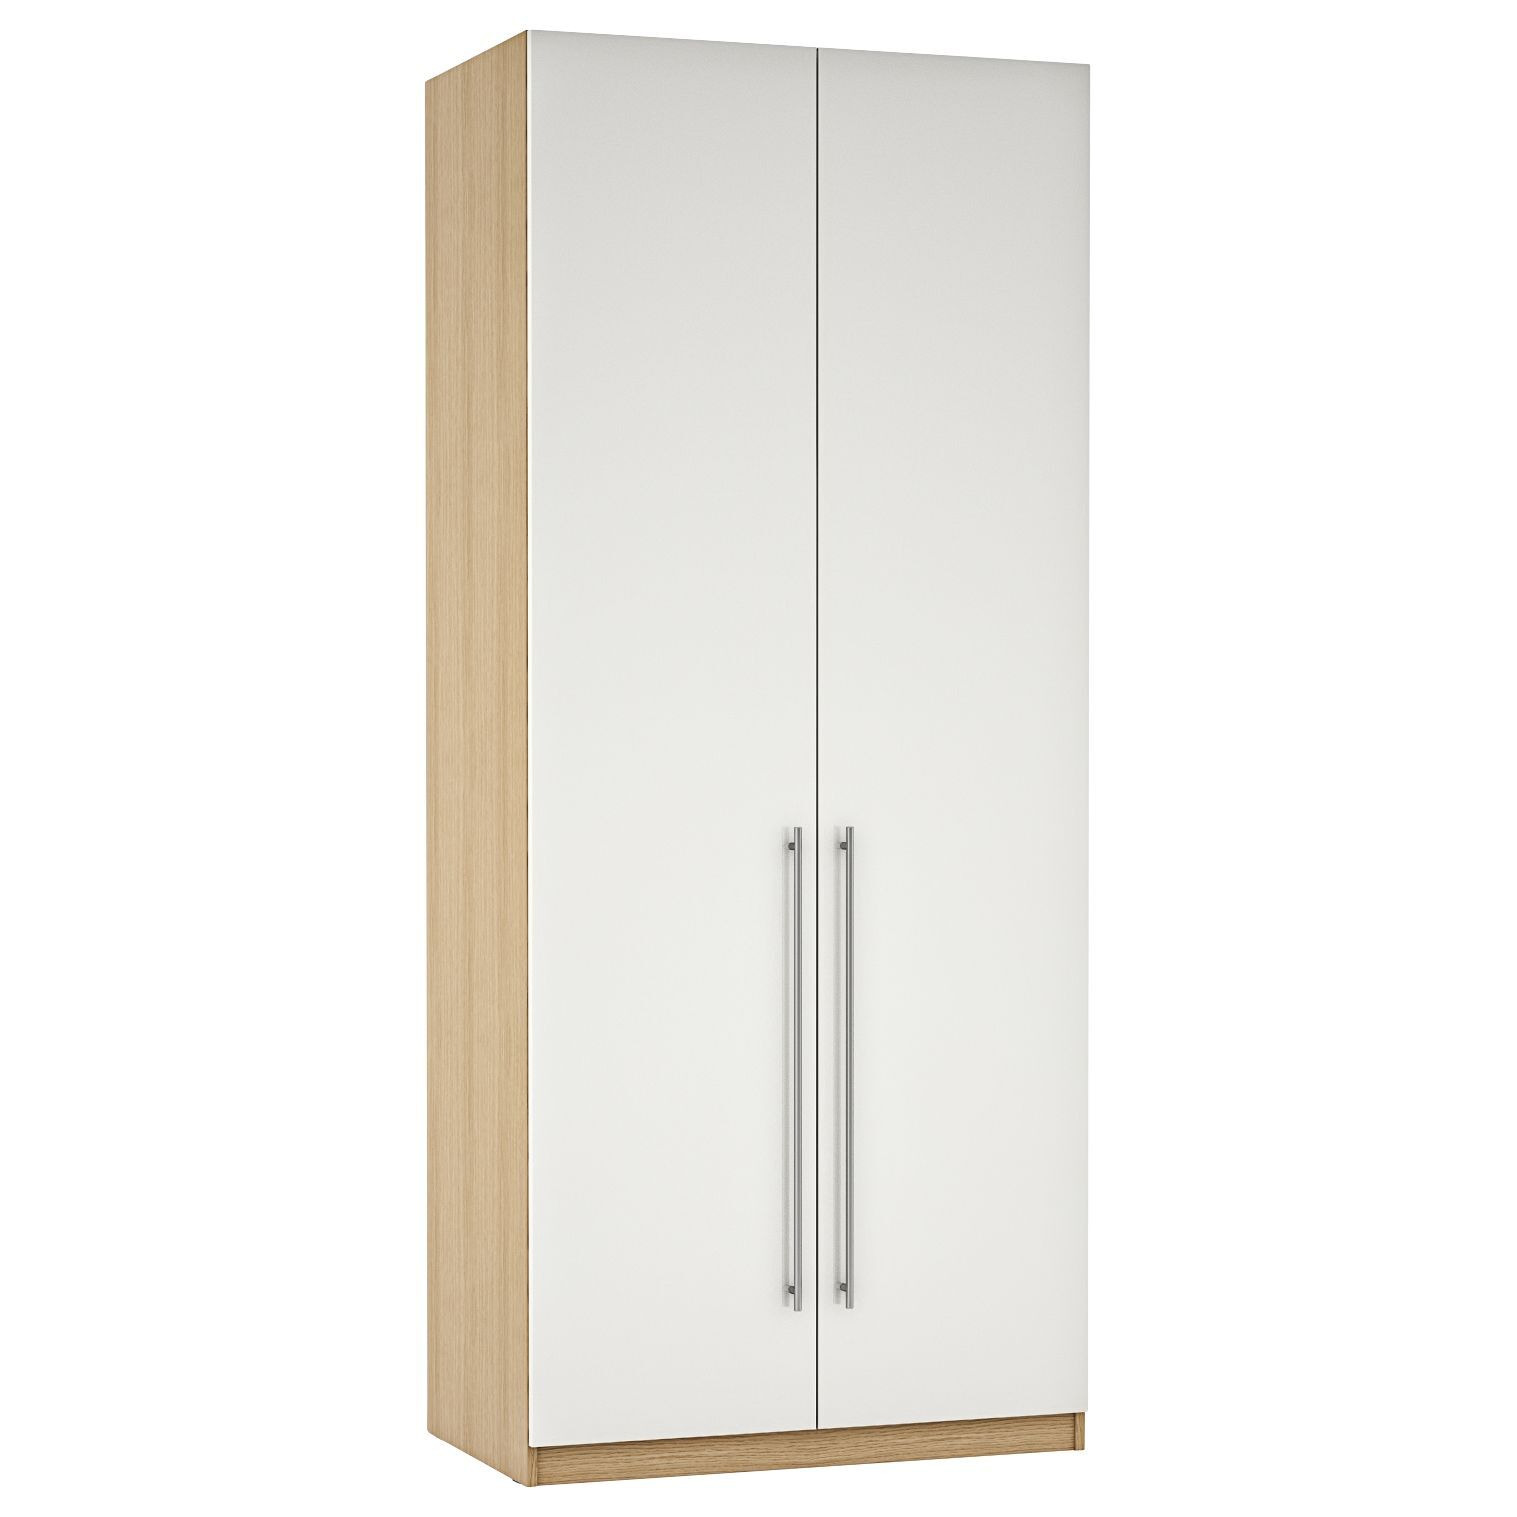 John Lewis ANYDAY Mix It Tall Double Wardrobe with Long T-bar Handles, Gloss White/Natural Oak - image 1